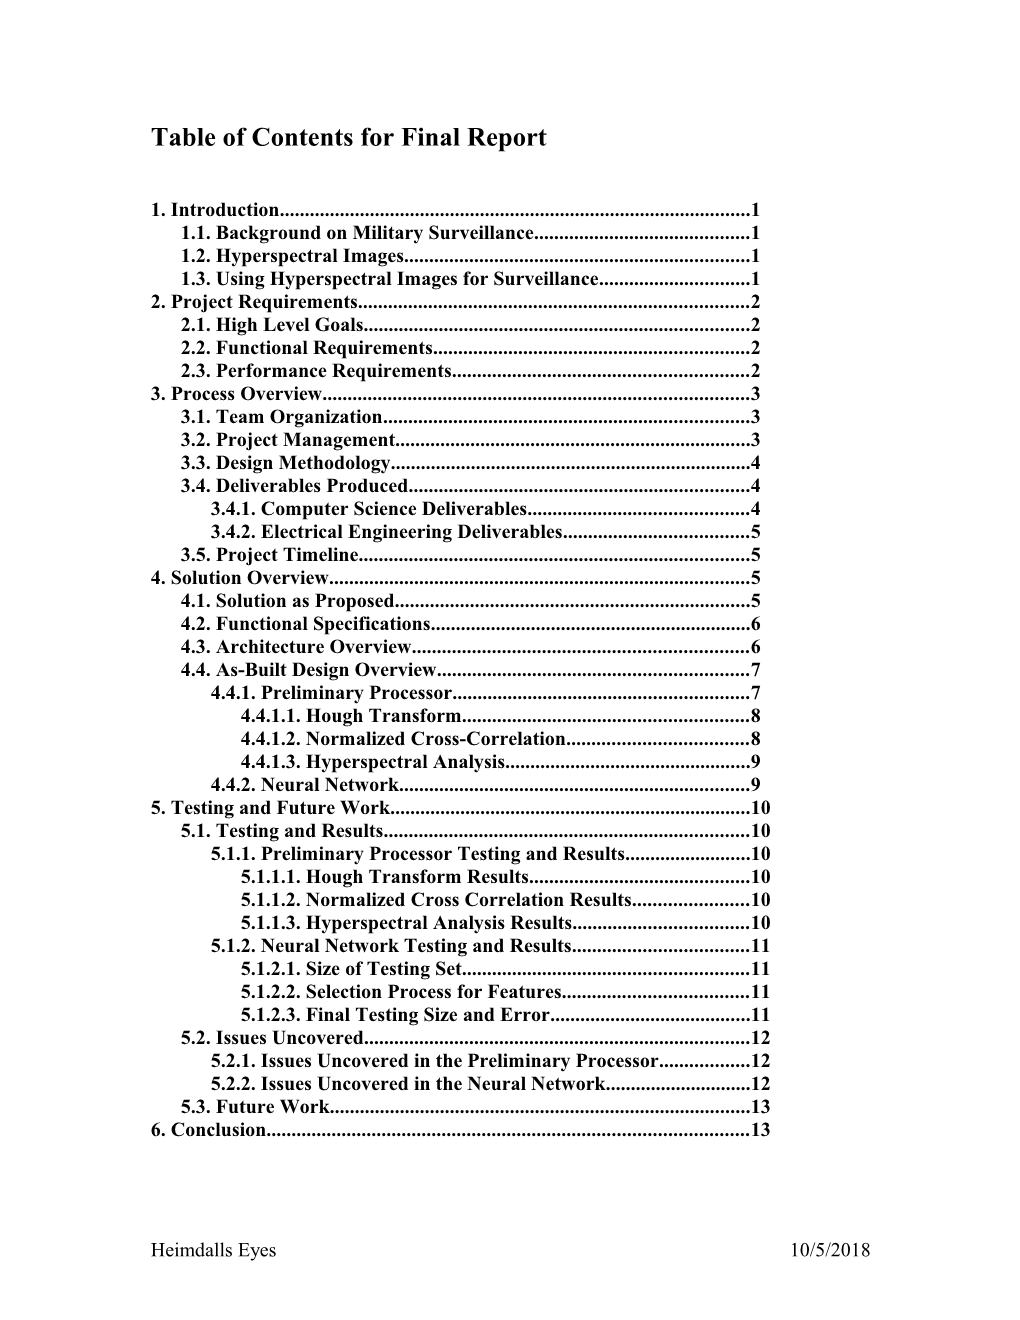 Table of Contents for Final Report